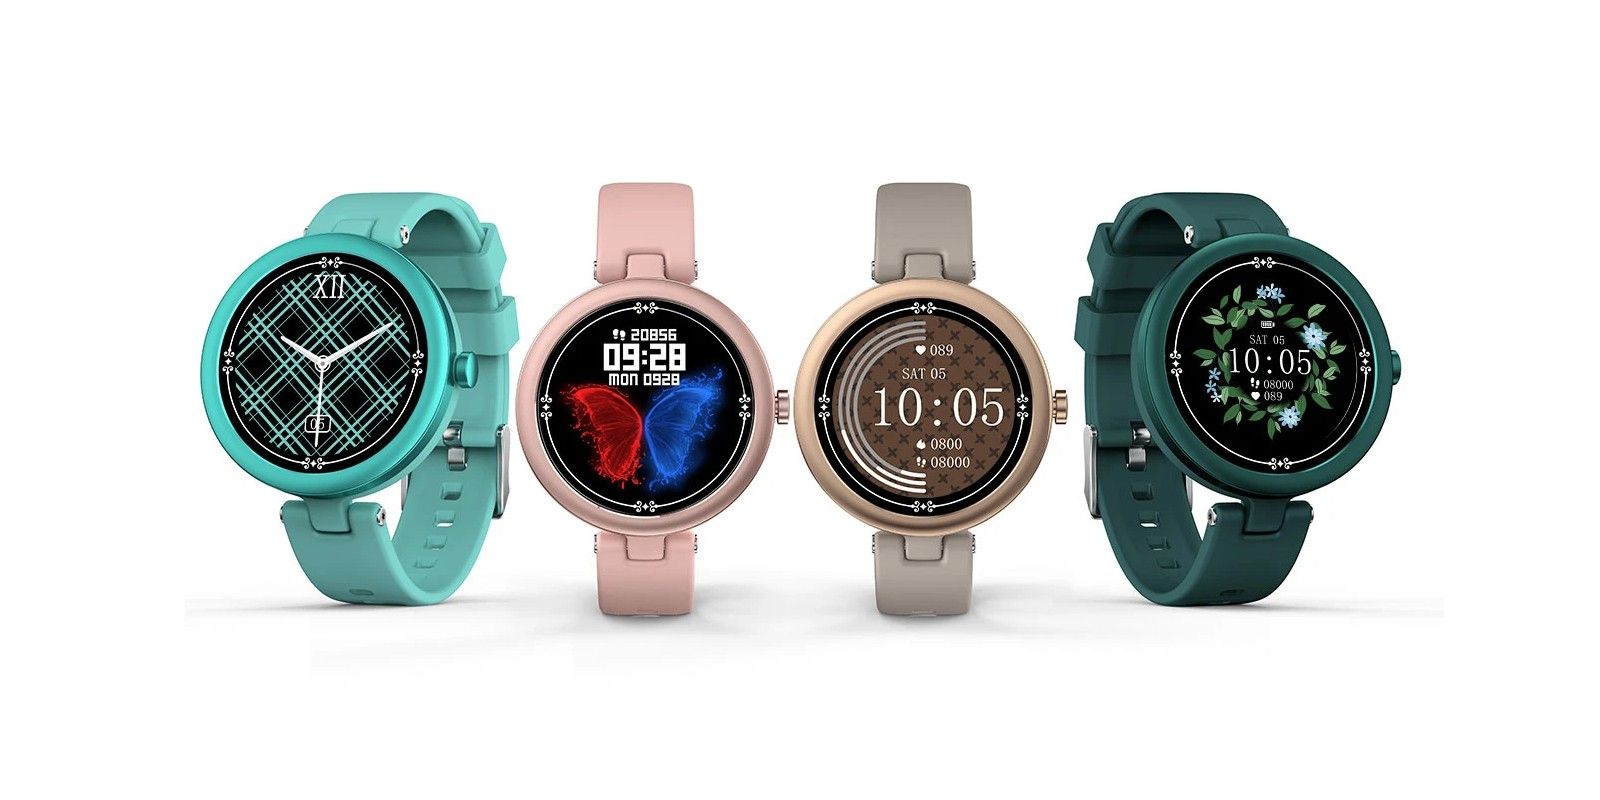 Chinese Copycat Launches $50 Version Of Garmin's $250 Lily Smartwatch